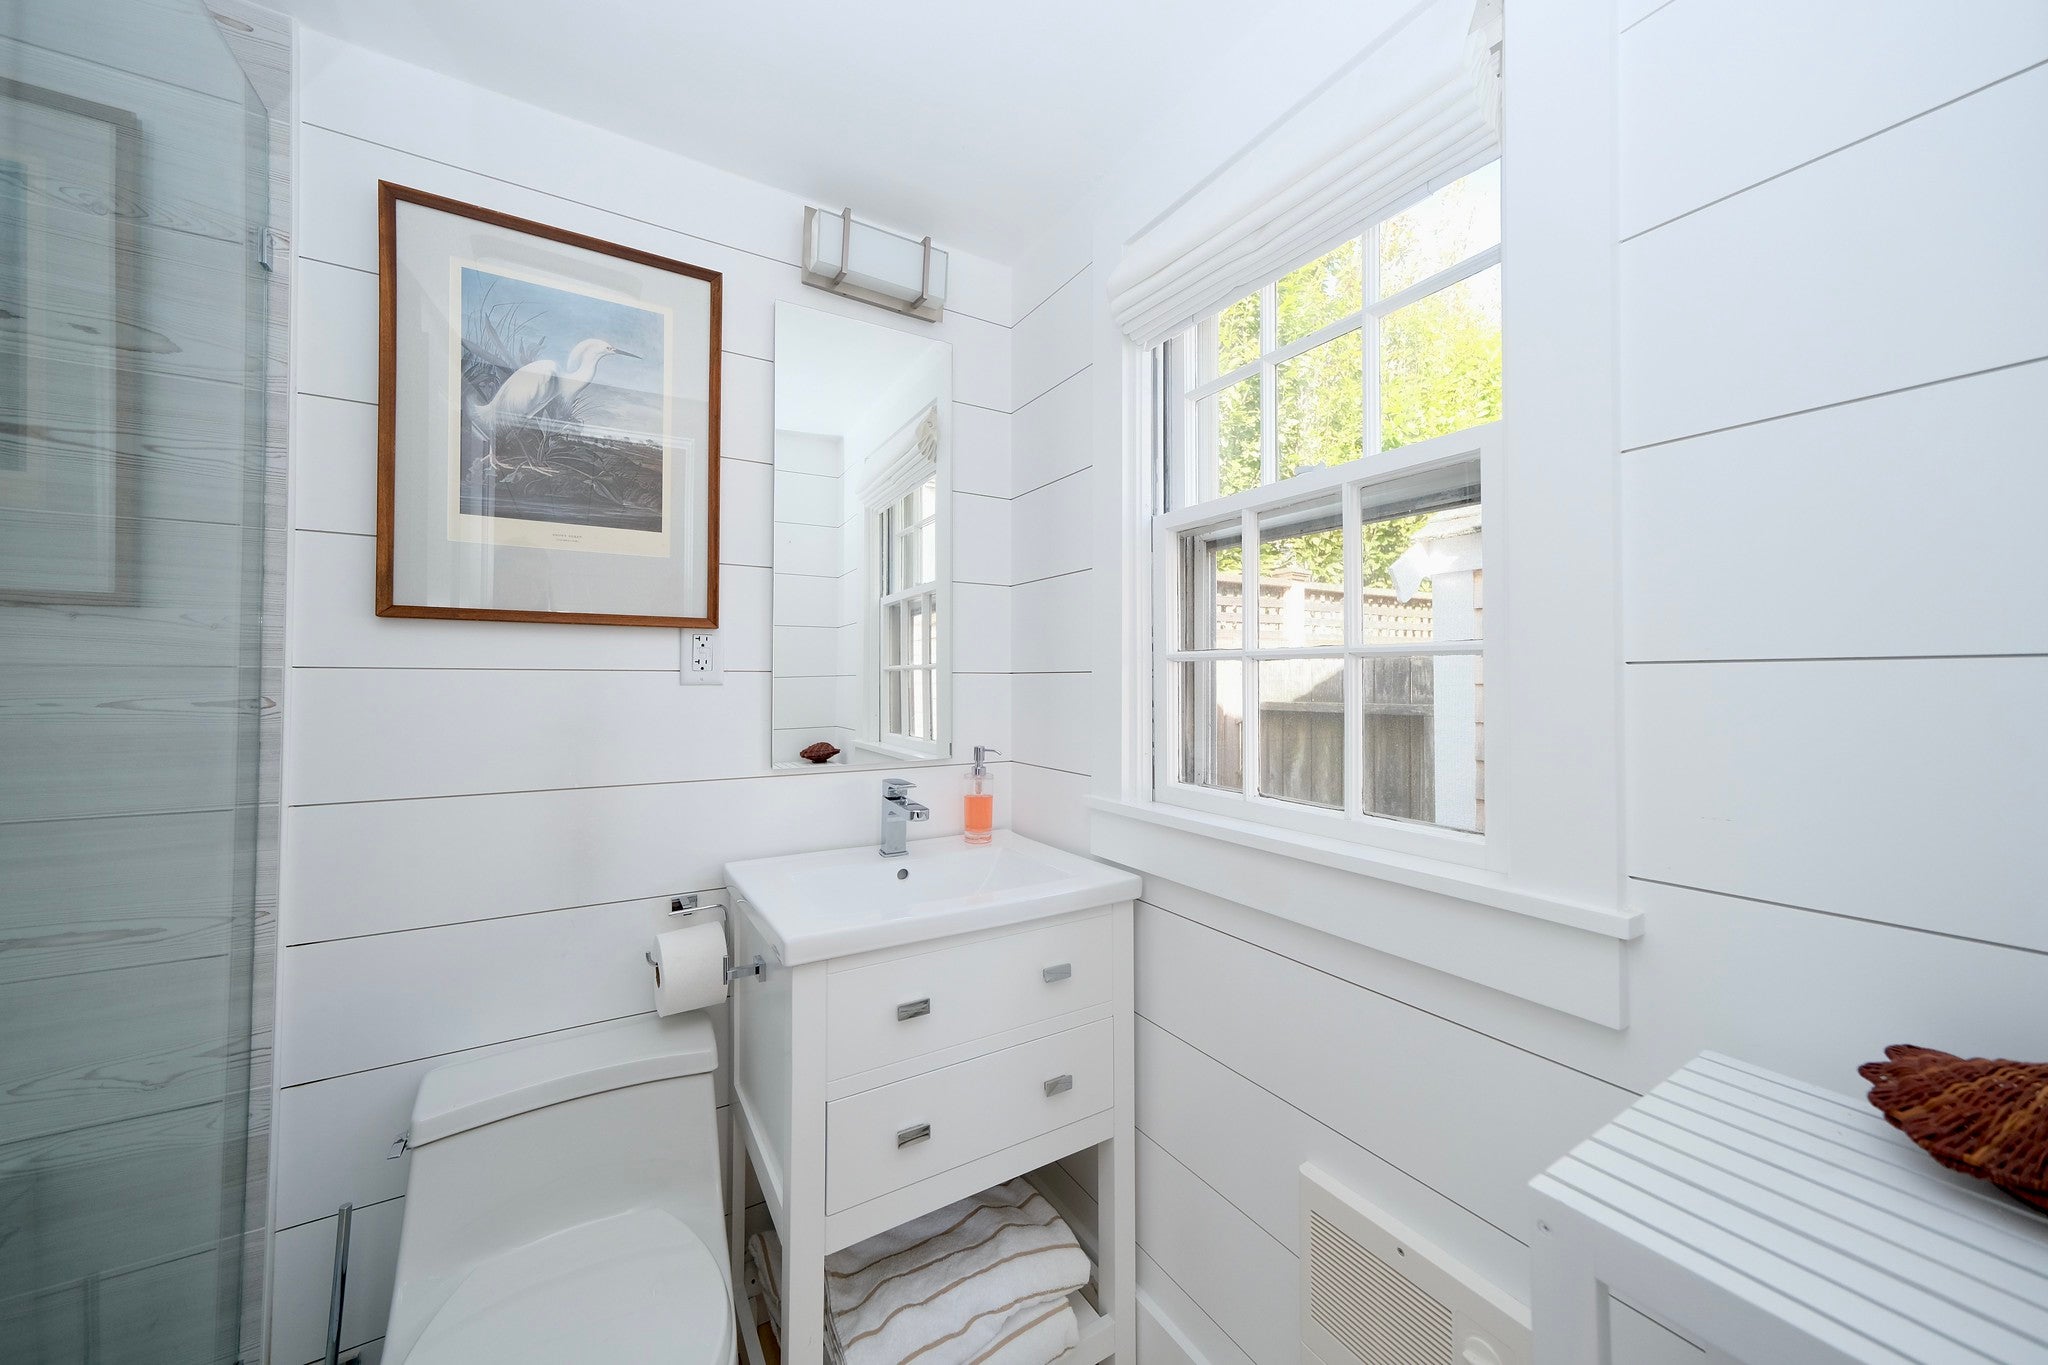 White shiplap walls a small sink with white cabinetry, and a standalone shower.